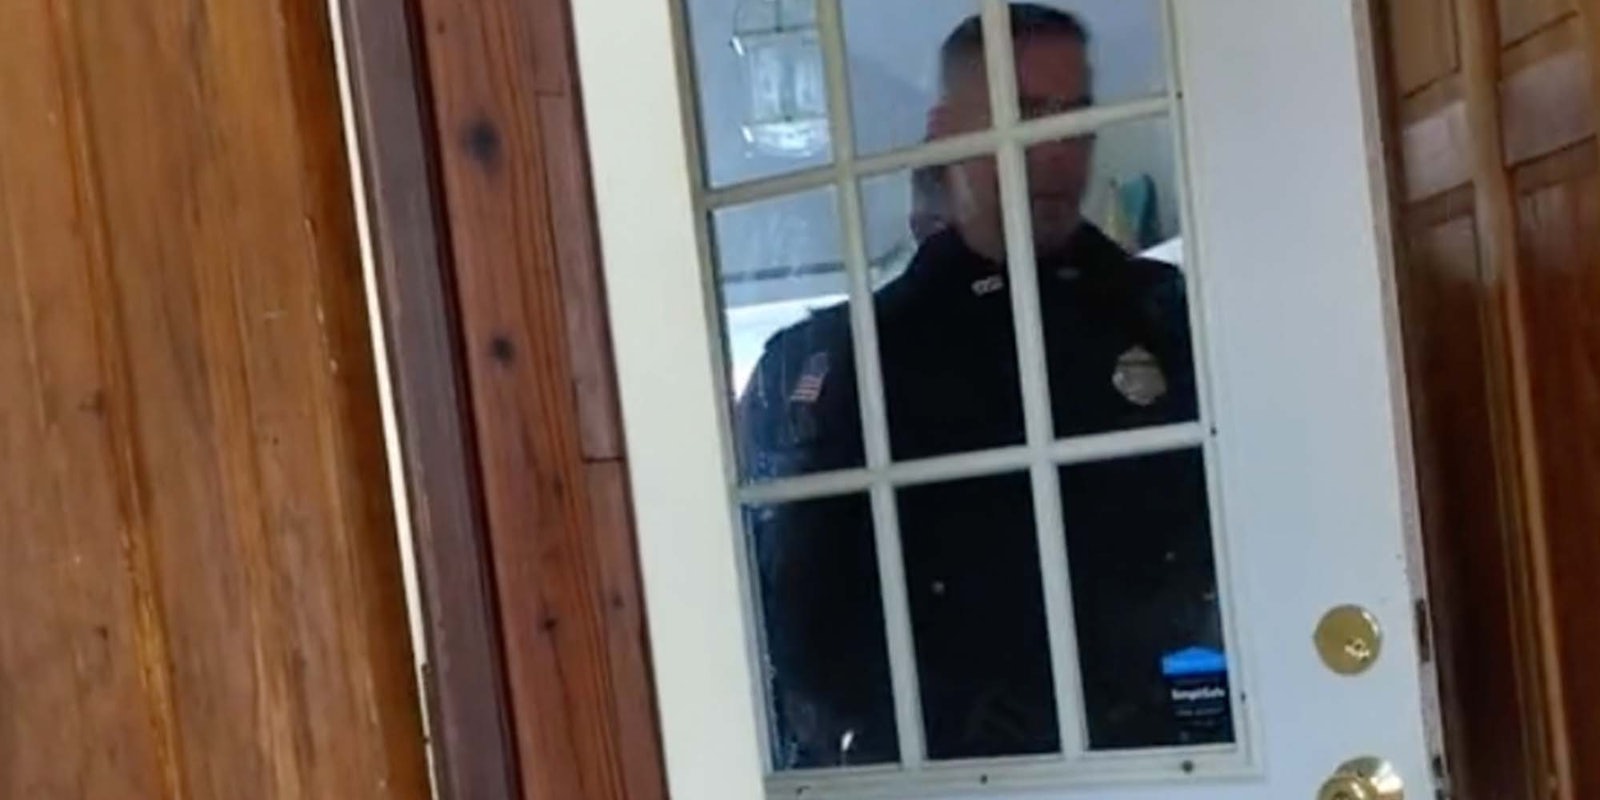 In a TikTok, Massachusetts police are seen kicking a door in order to perform a 'wellness check.'